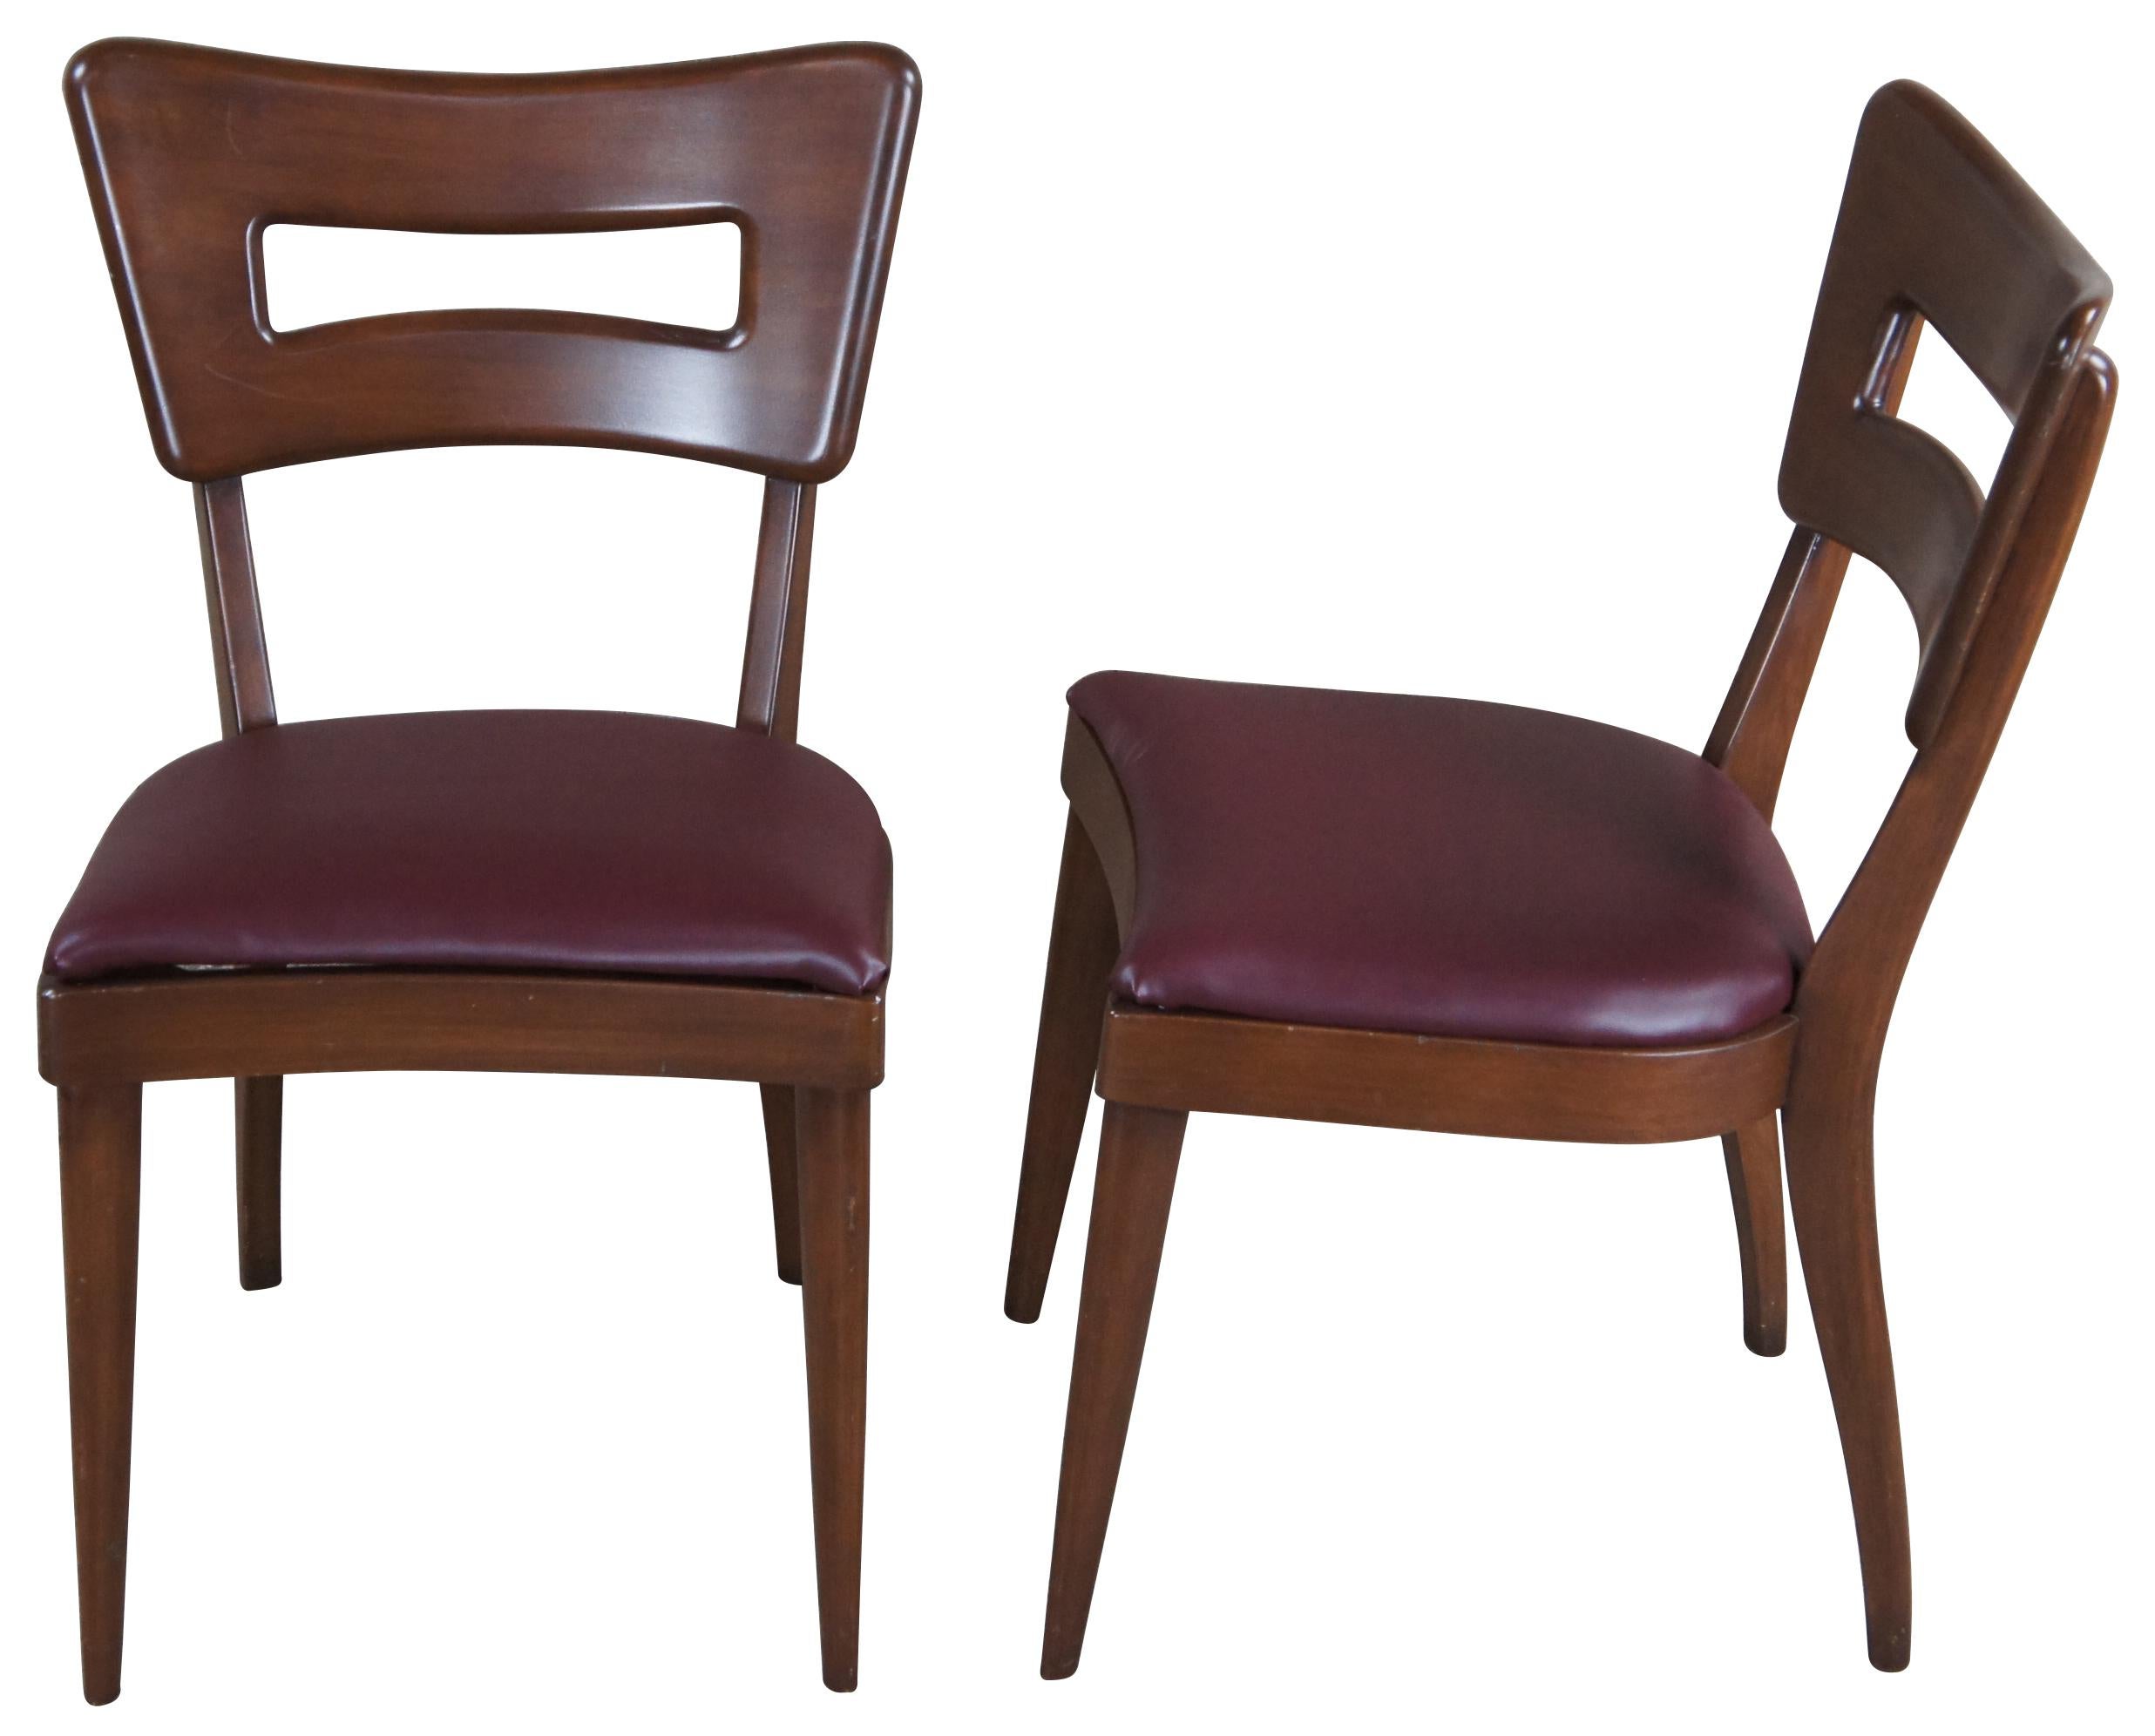 Heywood Wakefield sculpted dogbone dining side chairs, circa 1970s. Features a burgundy vinyl seat. M-1554-A.